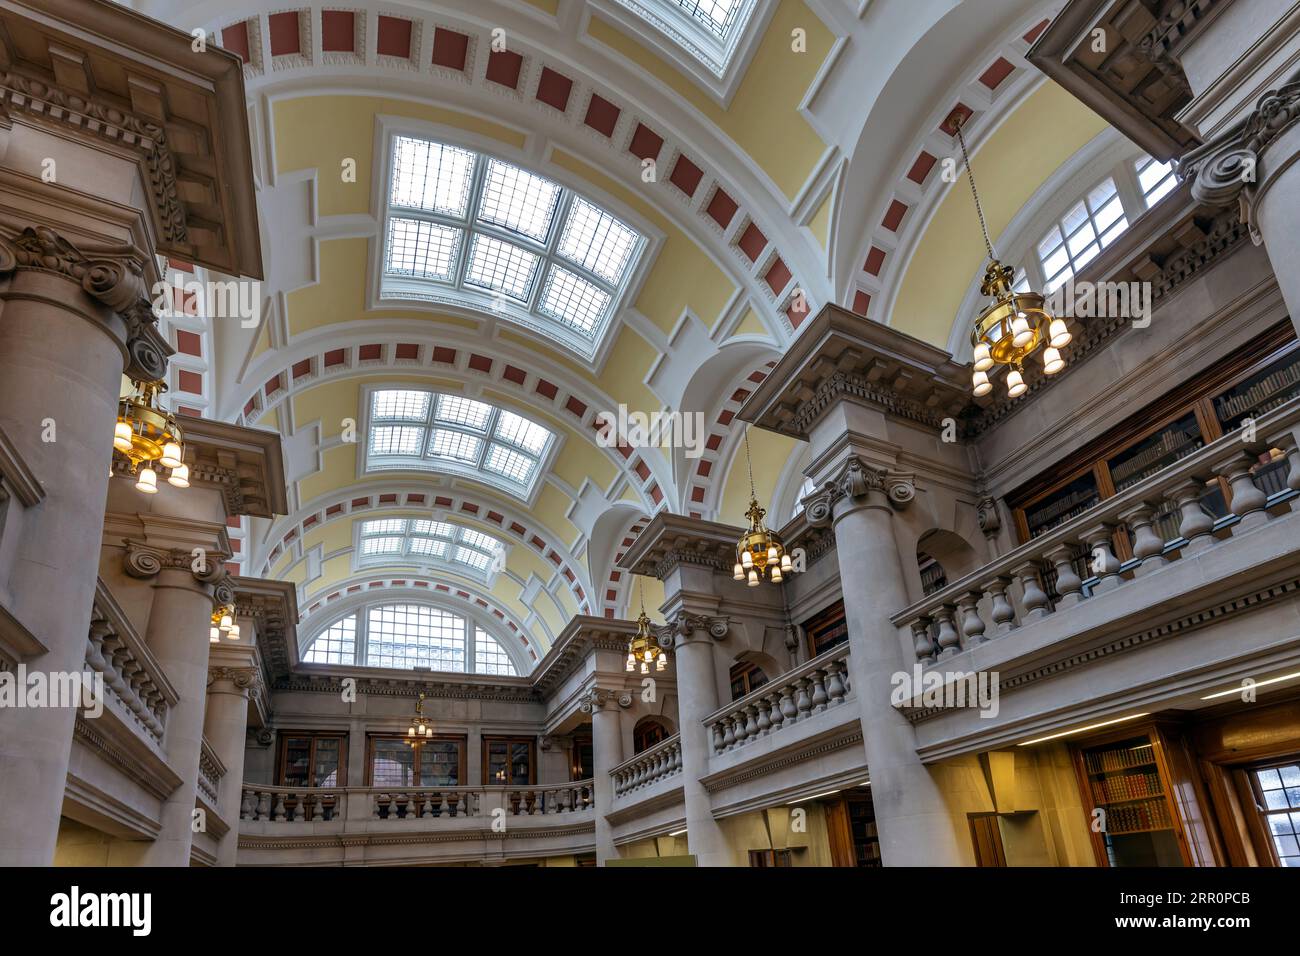 Hornby Library, Liverpool Central Library, England, UK Stock Photo